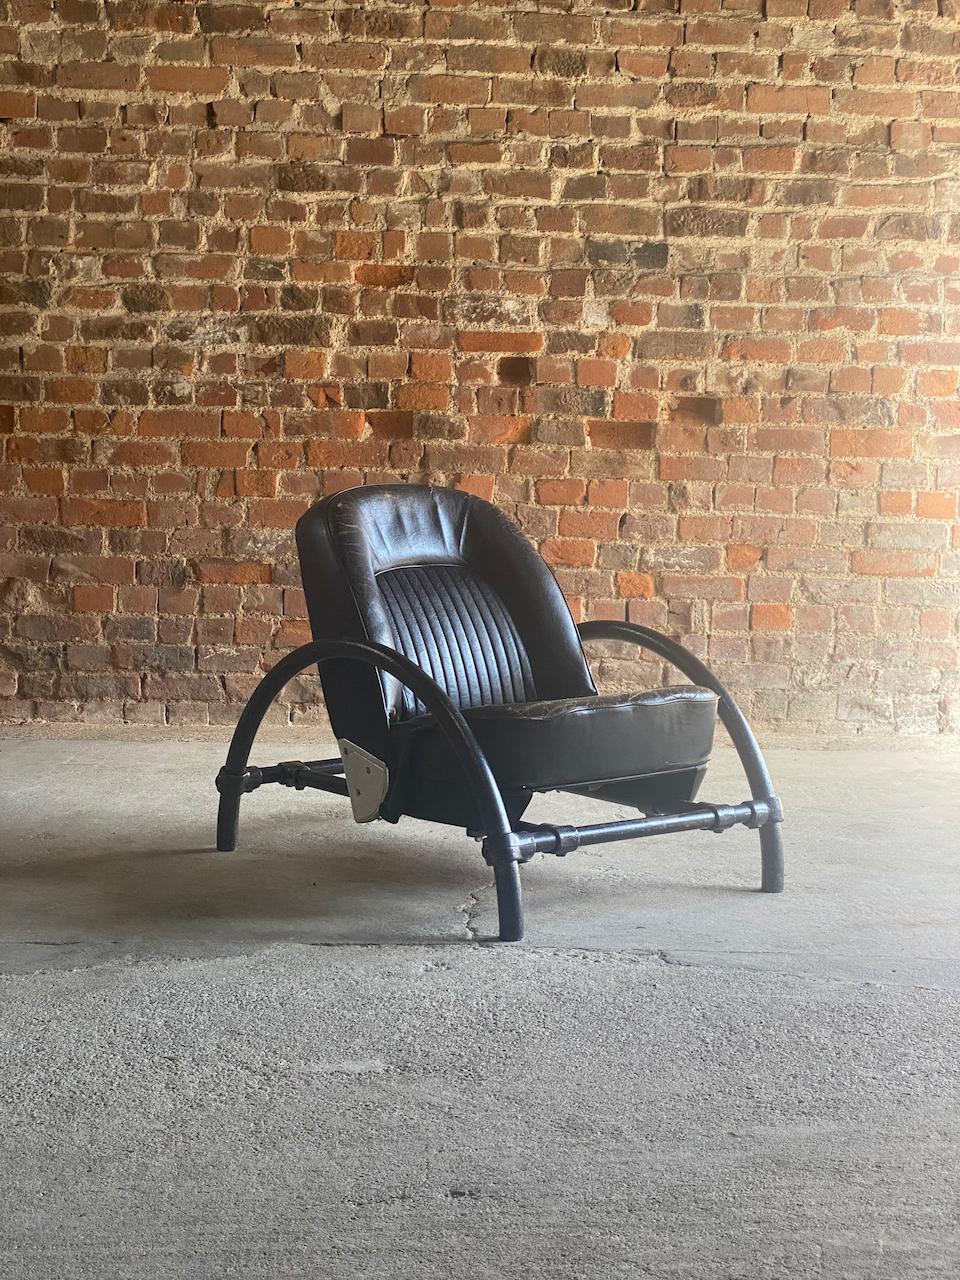 Industrial Ron Arad Rover Chair by One off Limited circa 1981